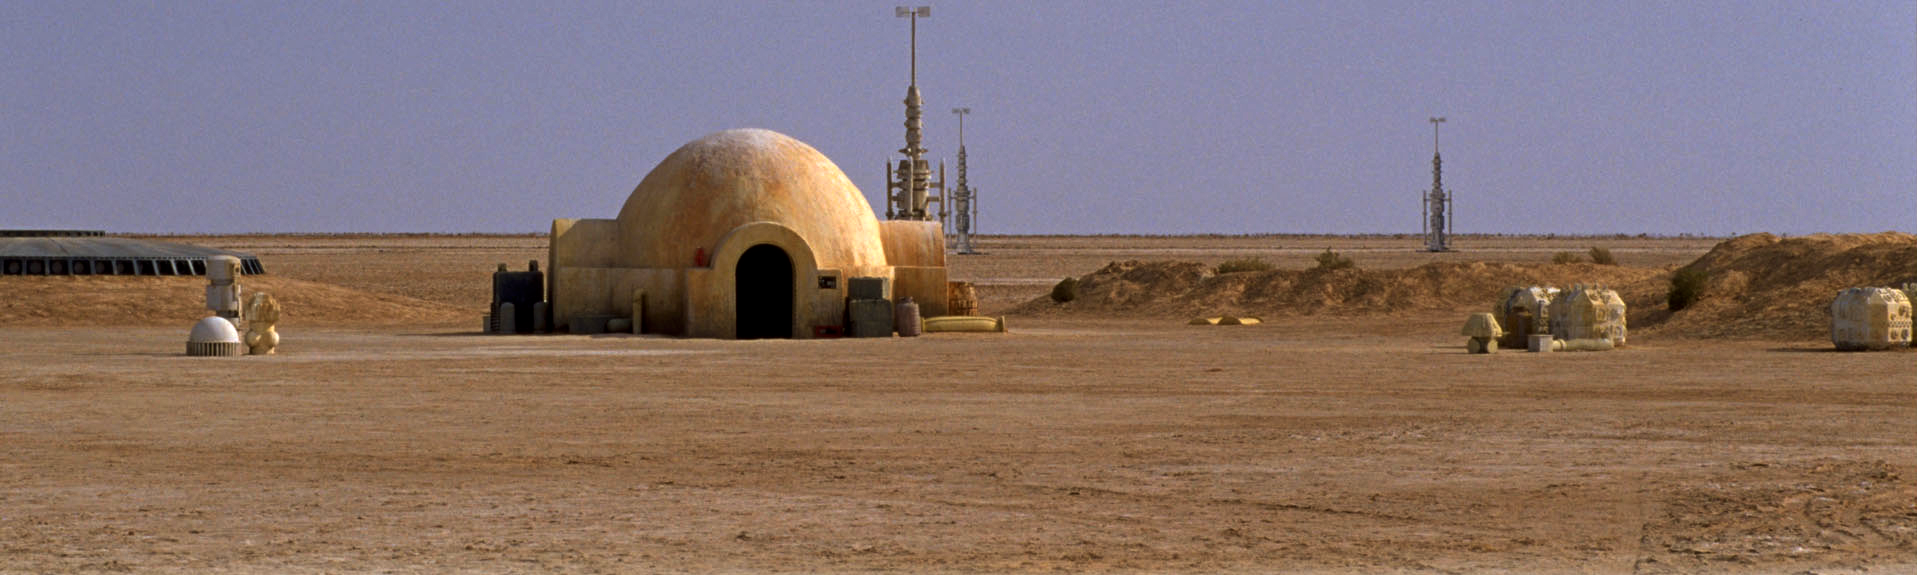 Housing influenced by Star Wars features